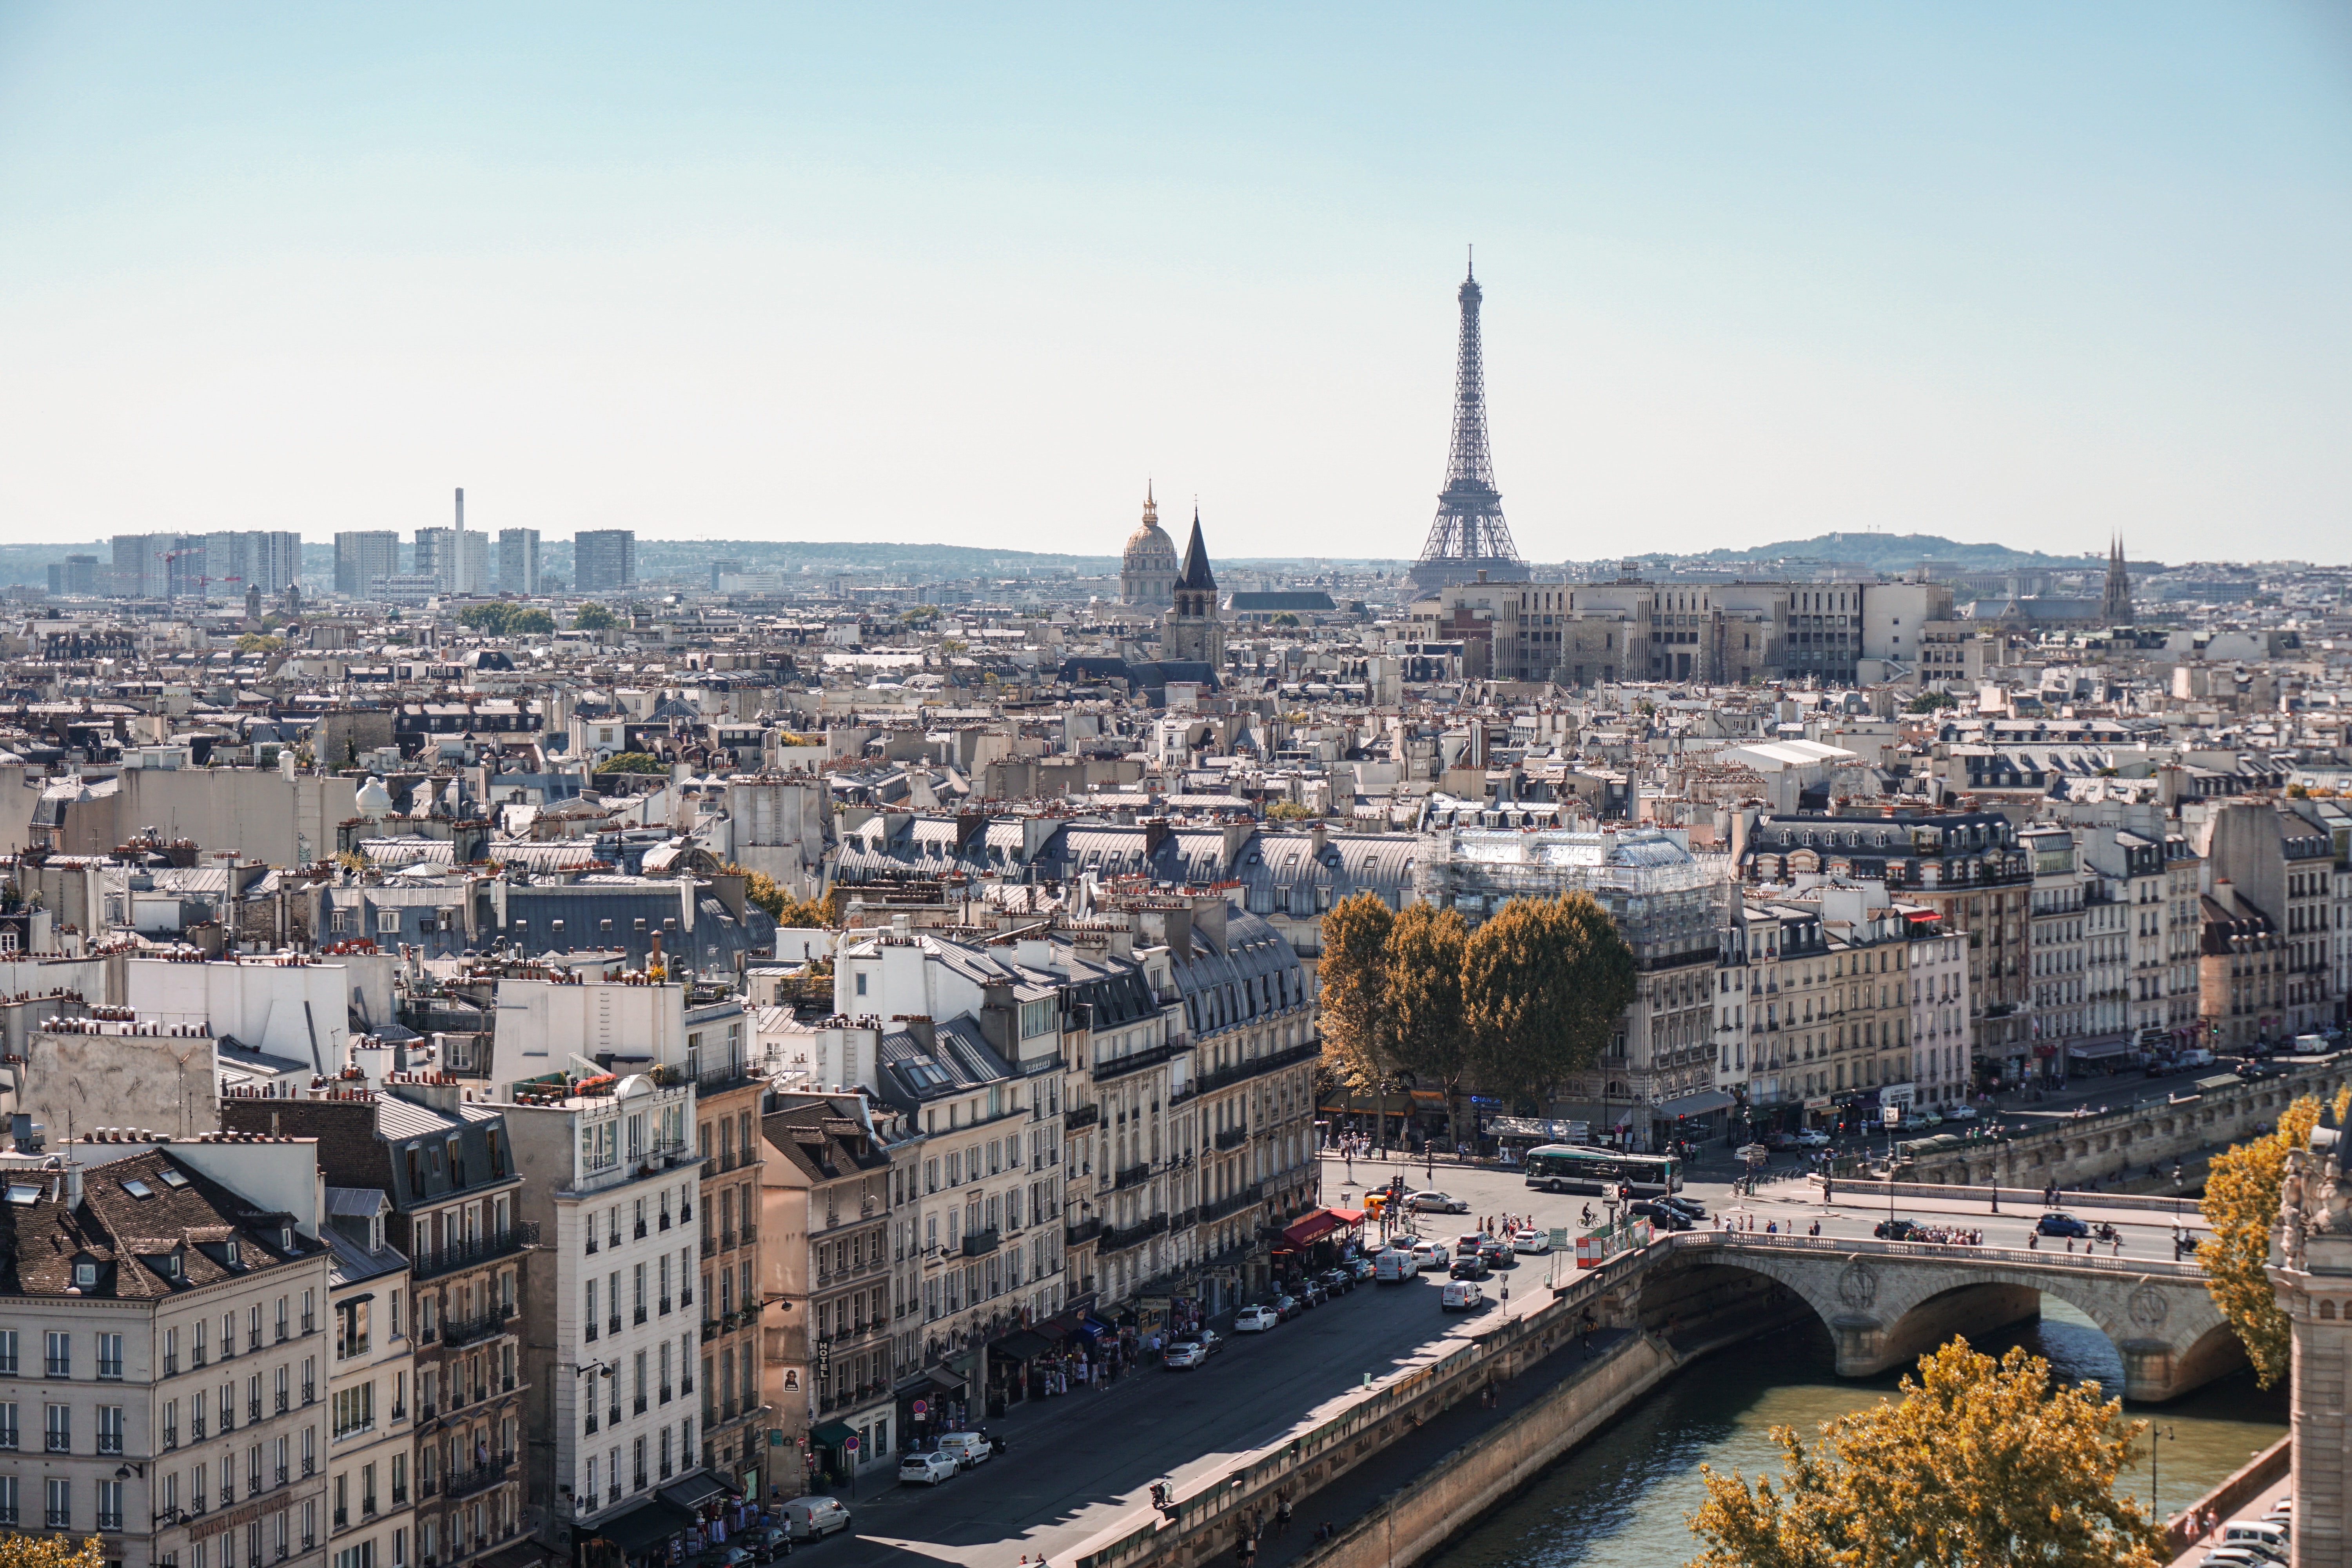 The OCEAN Board meeting will take place in Paris on 15 March 2023